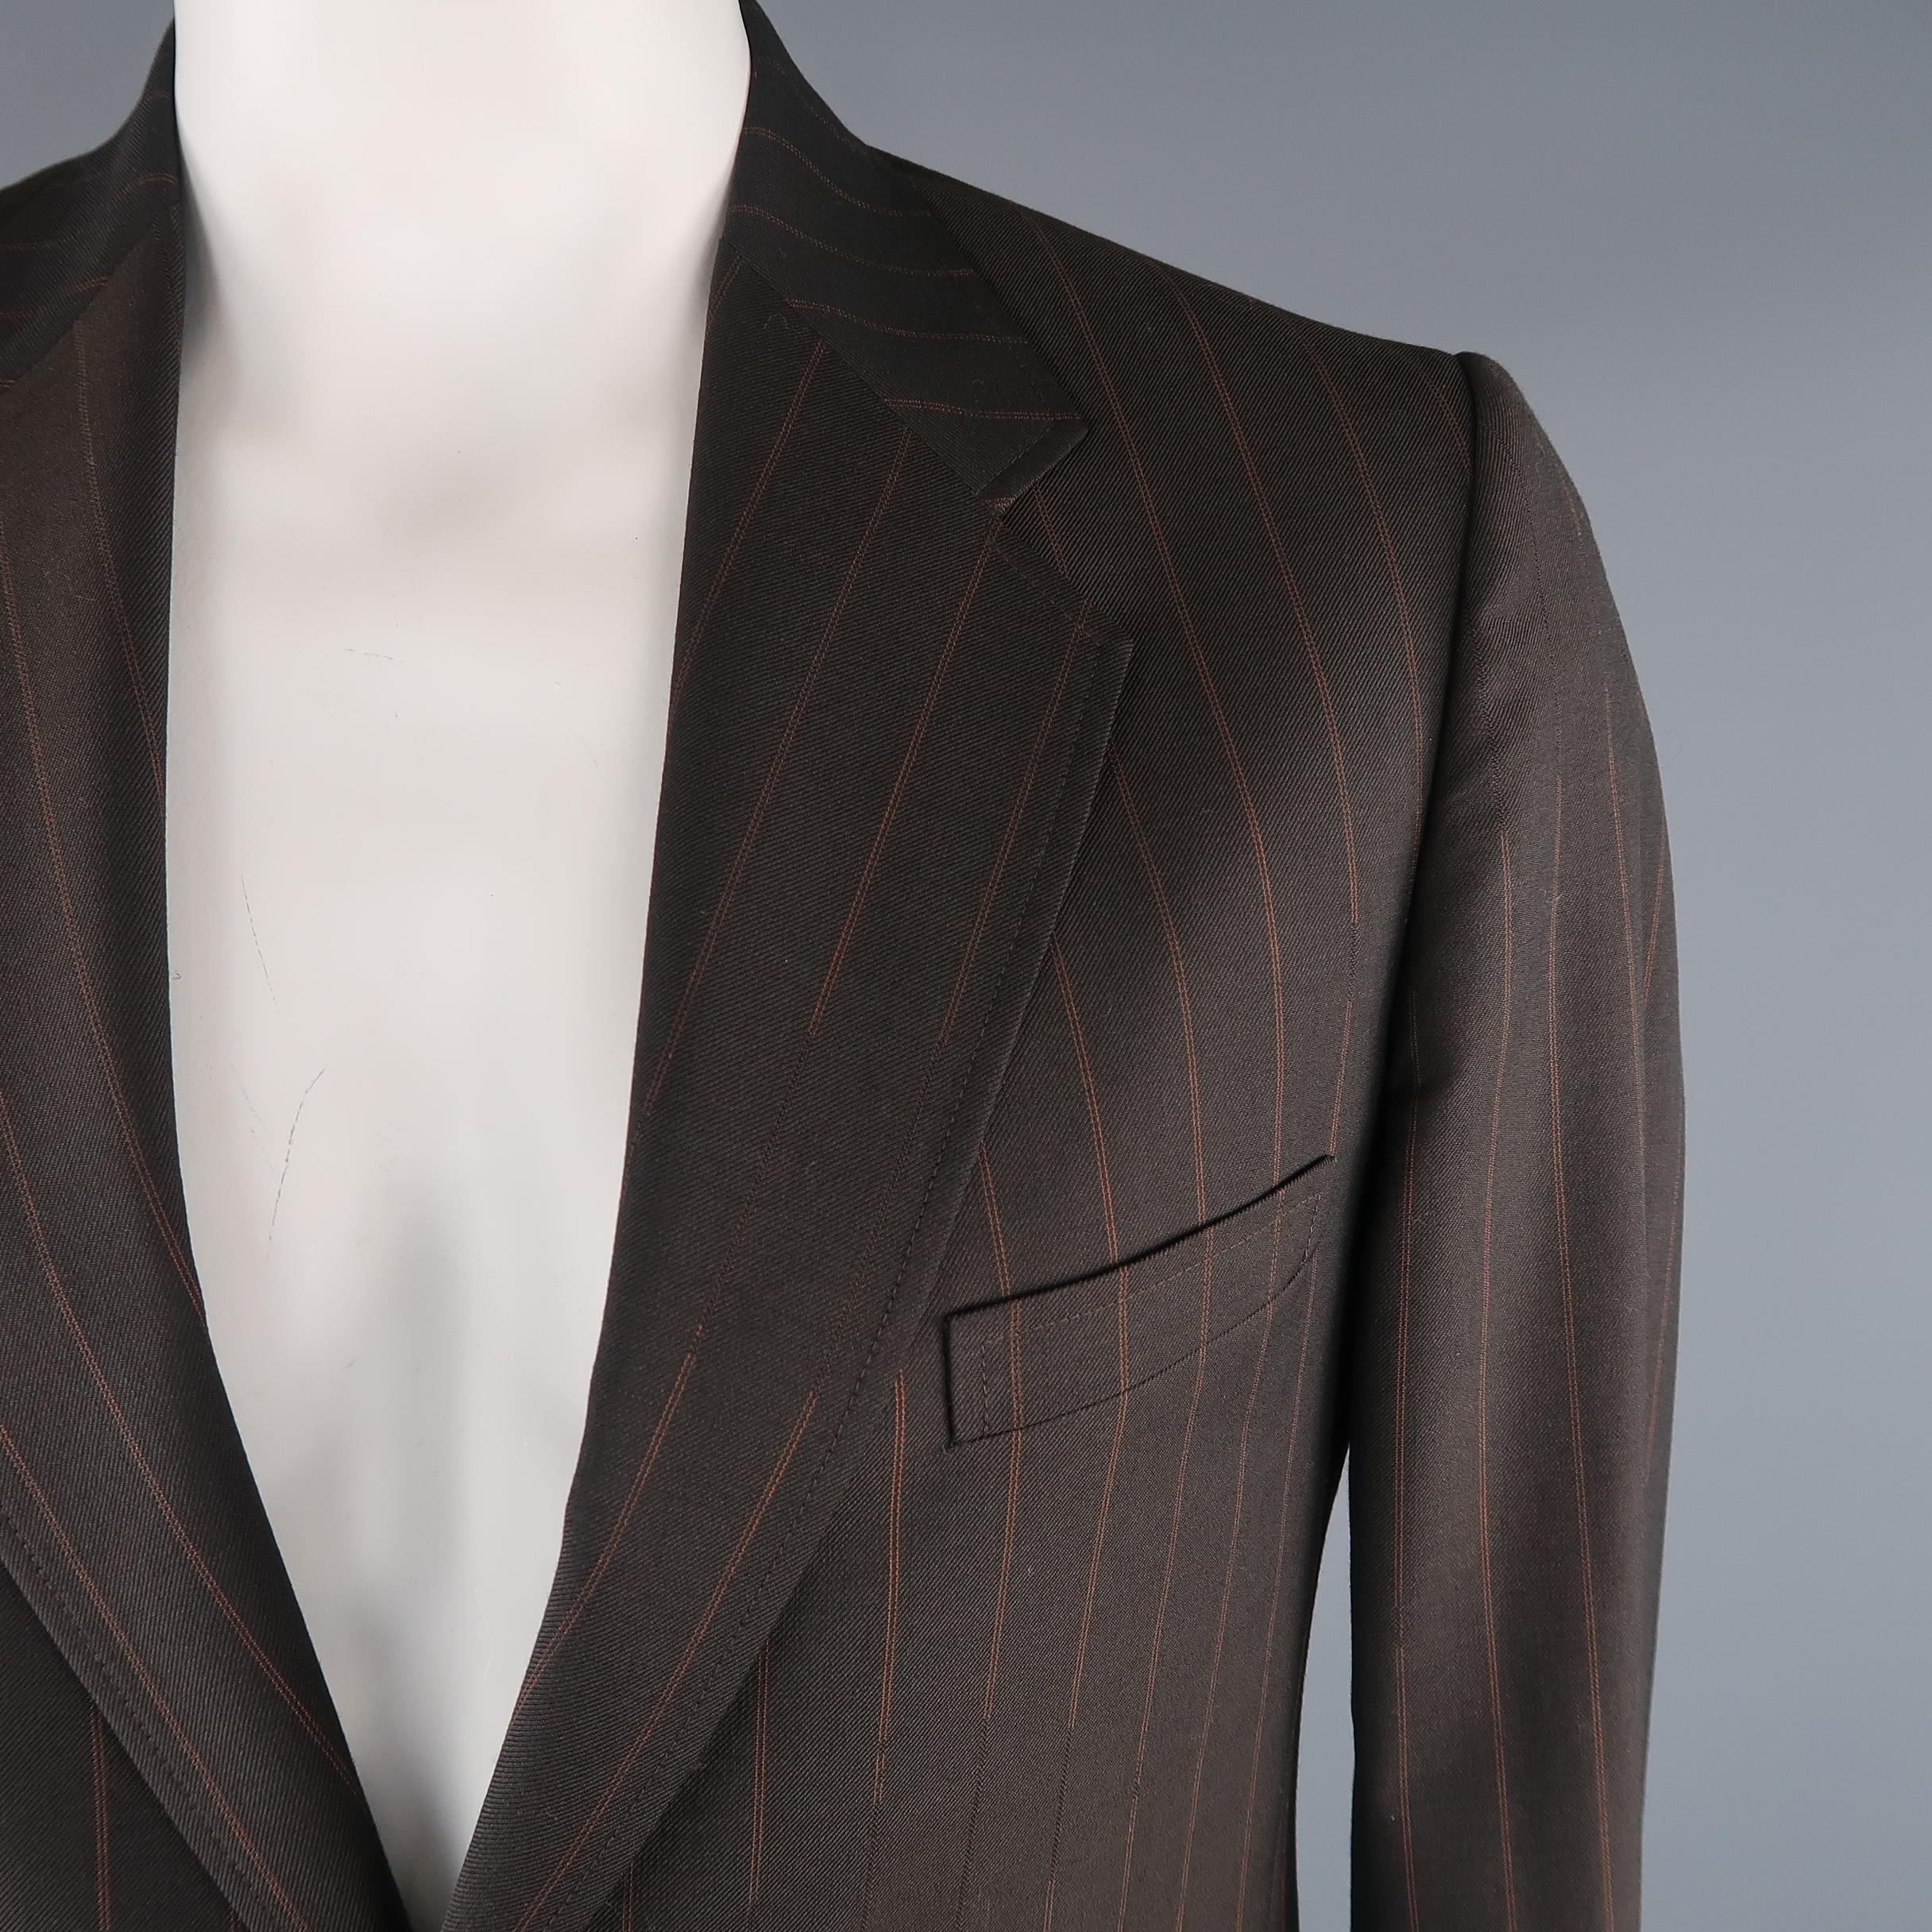 MAISON MARTIN MARGIELA sport coat come in brown striped wool, notch lapel, 2 buttons, flap pockets, single vent on the hem back and functional buttons on the cuff. Made in Italy.
 
Excellent  Pre-Owned Condition.
Marked: 52 IT
 
Measurements:
